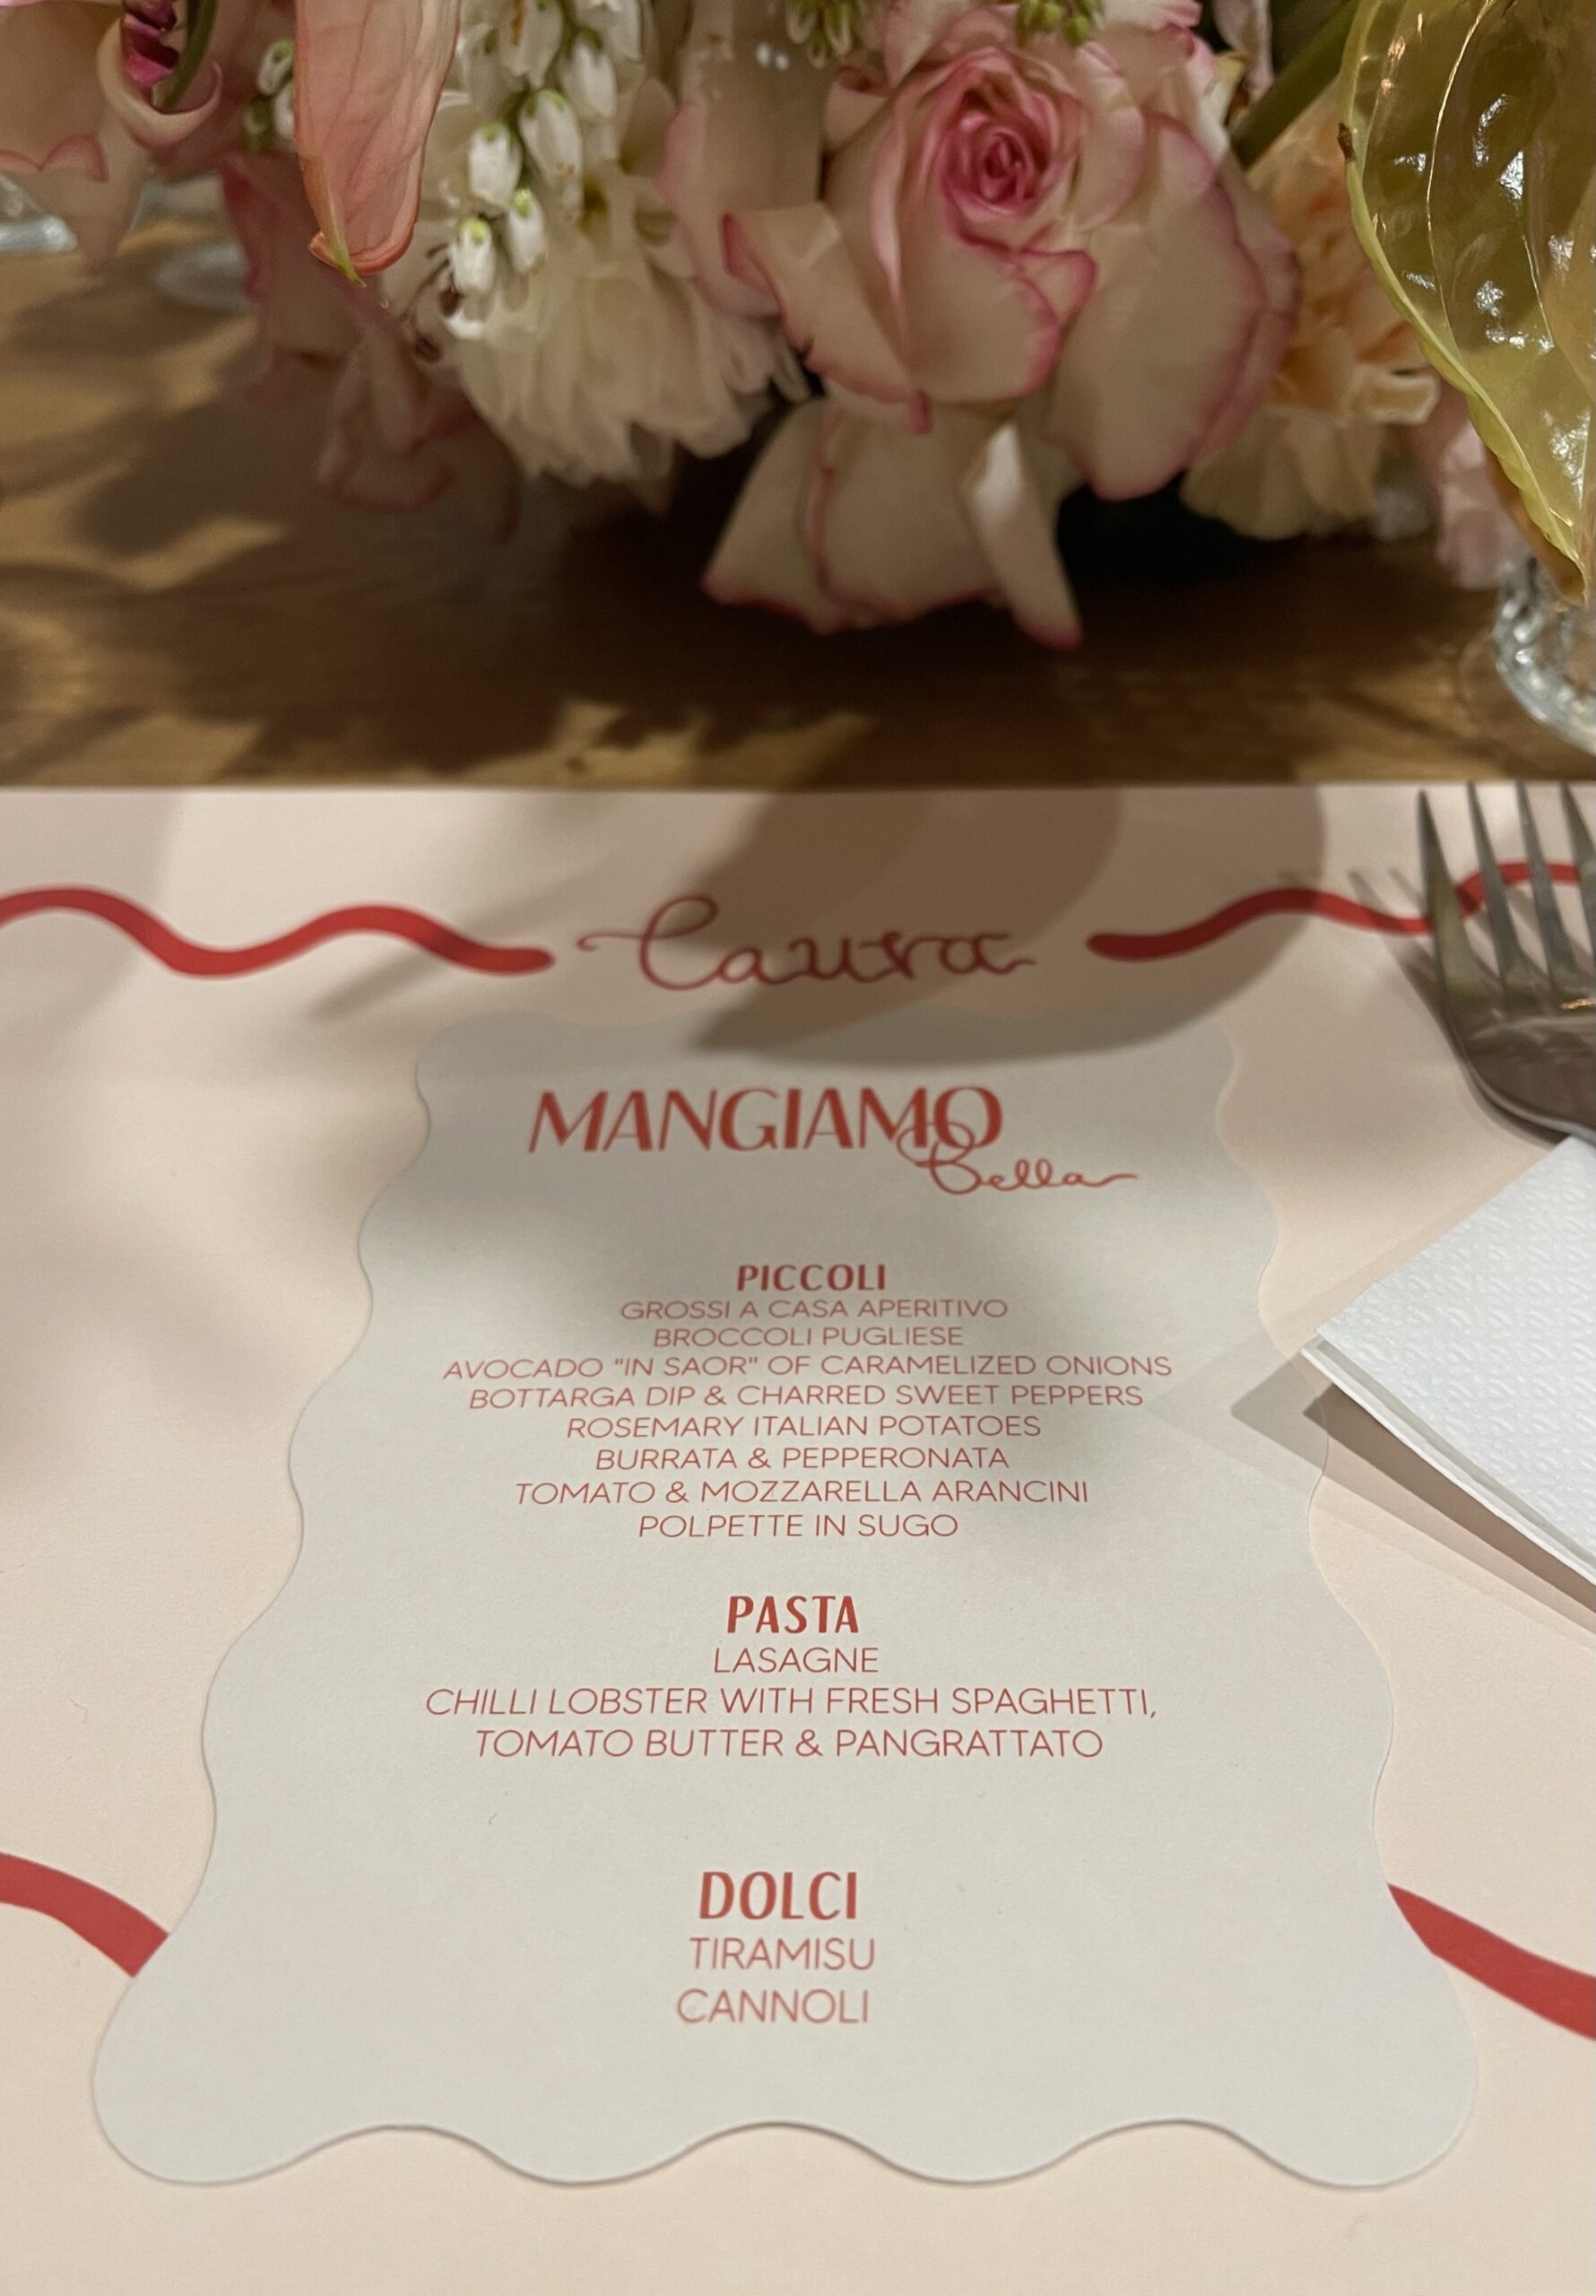 A personalised place setting for Laura, with a scalloped white menu with red writing. In the background are florals provided by Coral & Co., partners, sitting in the middle of the table.